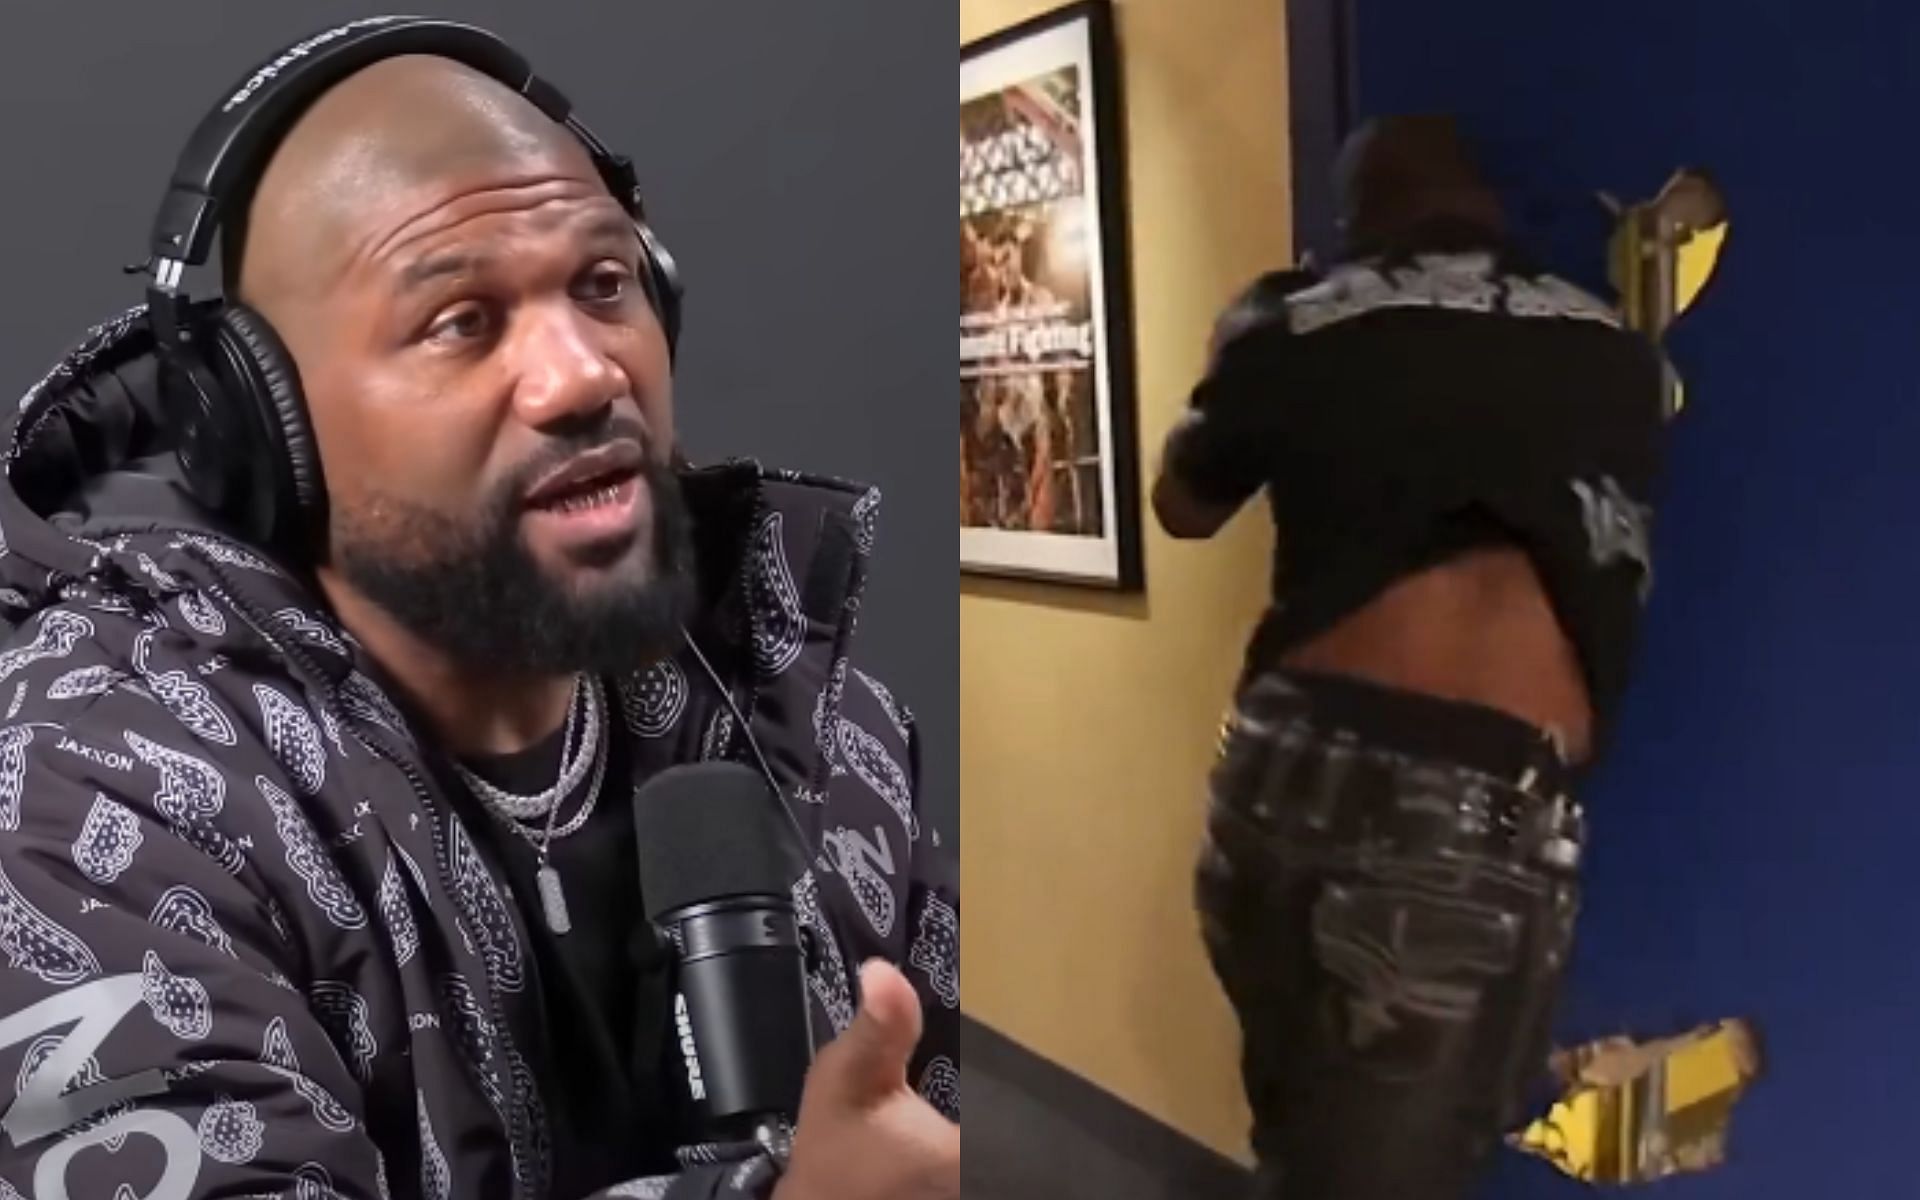 Quinton &lsquo;Rampage&rsquo; Jackson reveals hidden story about female judge which triggered him to rip apart door on TUF set [Image courtesy: JAXXON PODCAST - YouTube, and @RosssEdmonds - X]